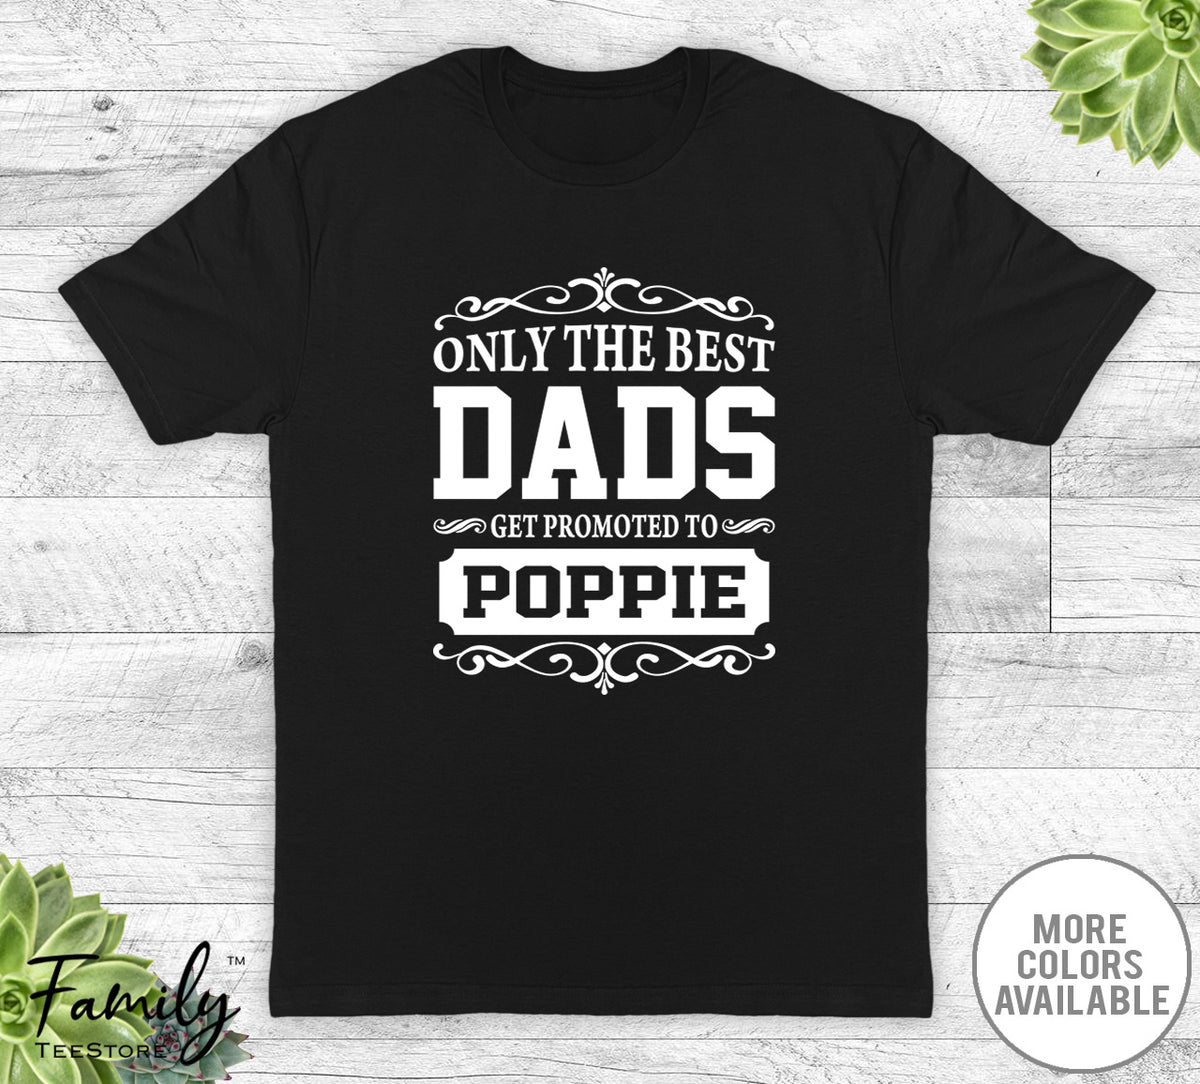 Only The Best Dads Get Promoted To Poppie - Unisex T-shirt - Poppie Shirt - Poppie Gift - familyteeprints